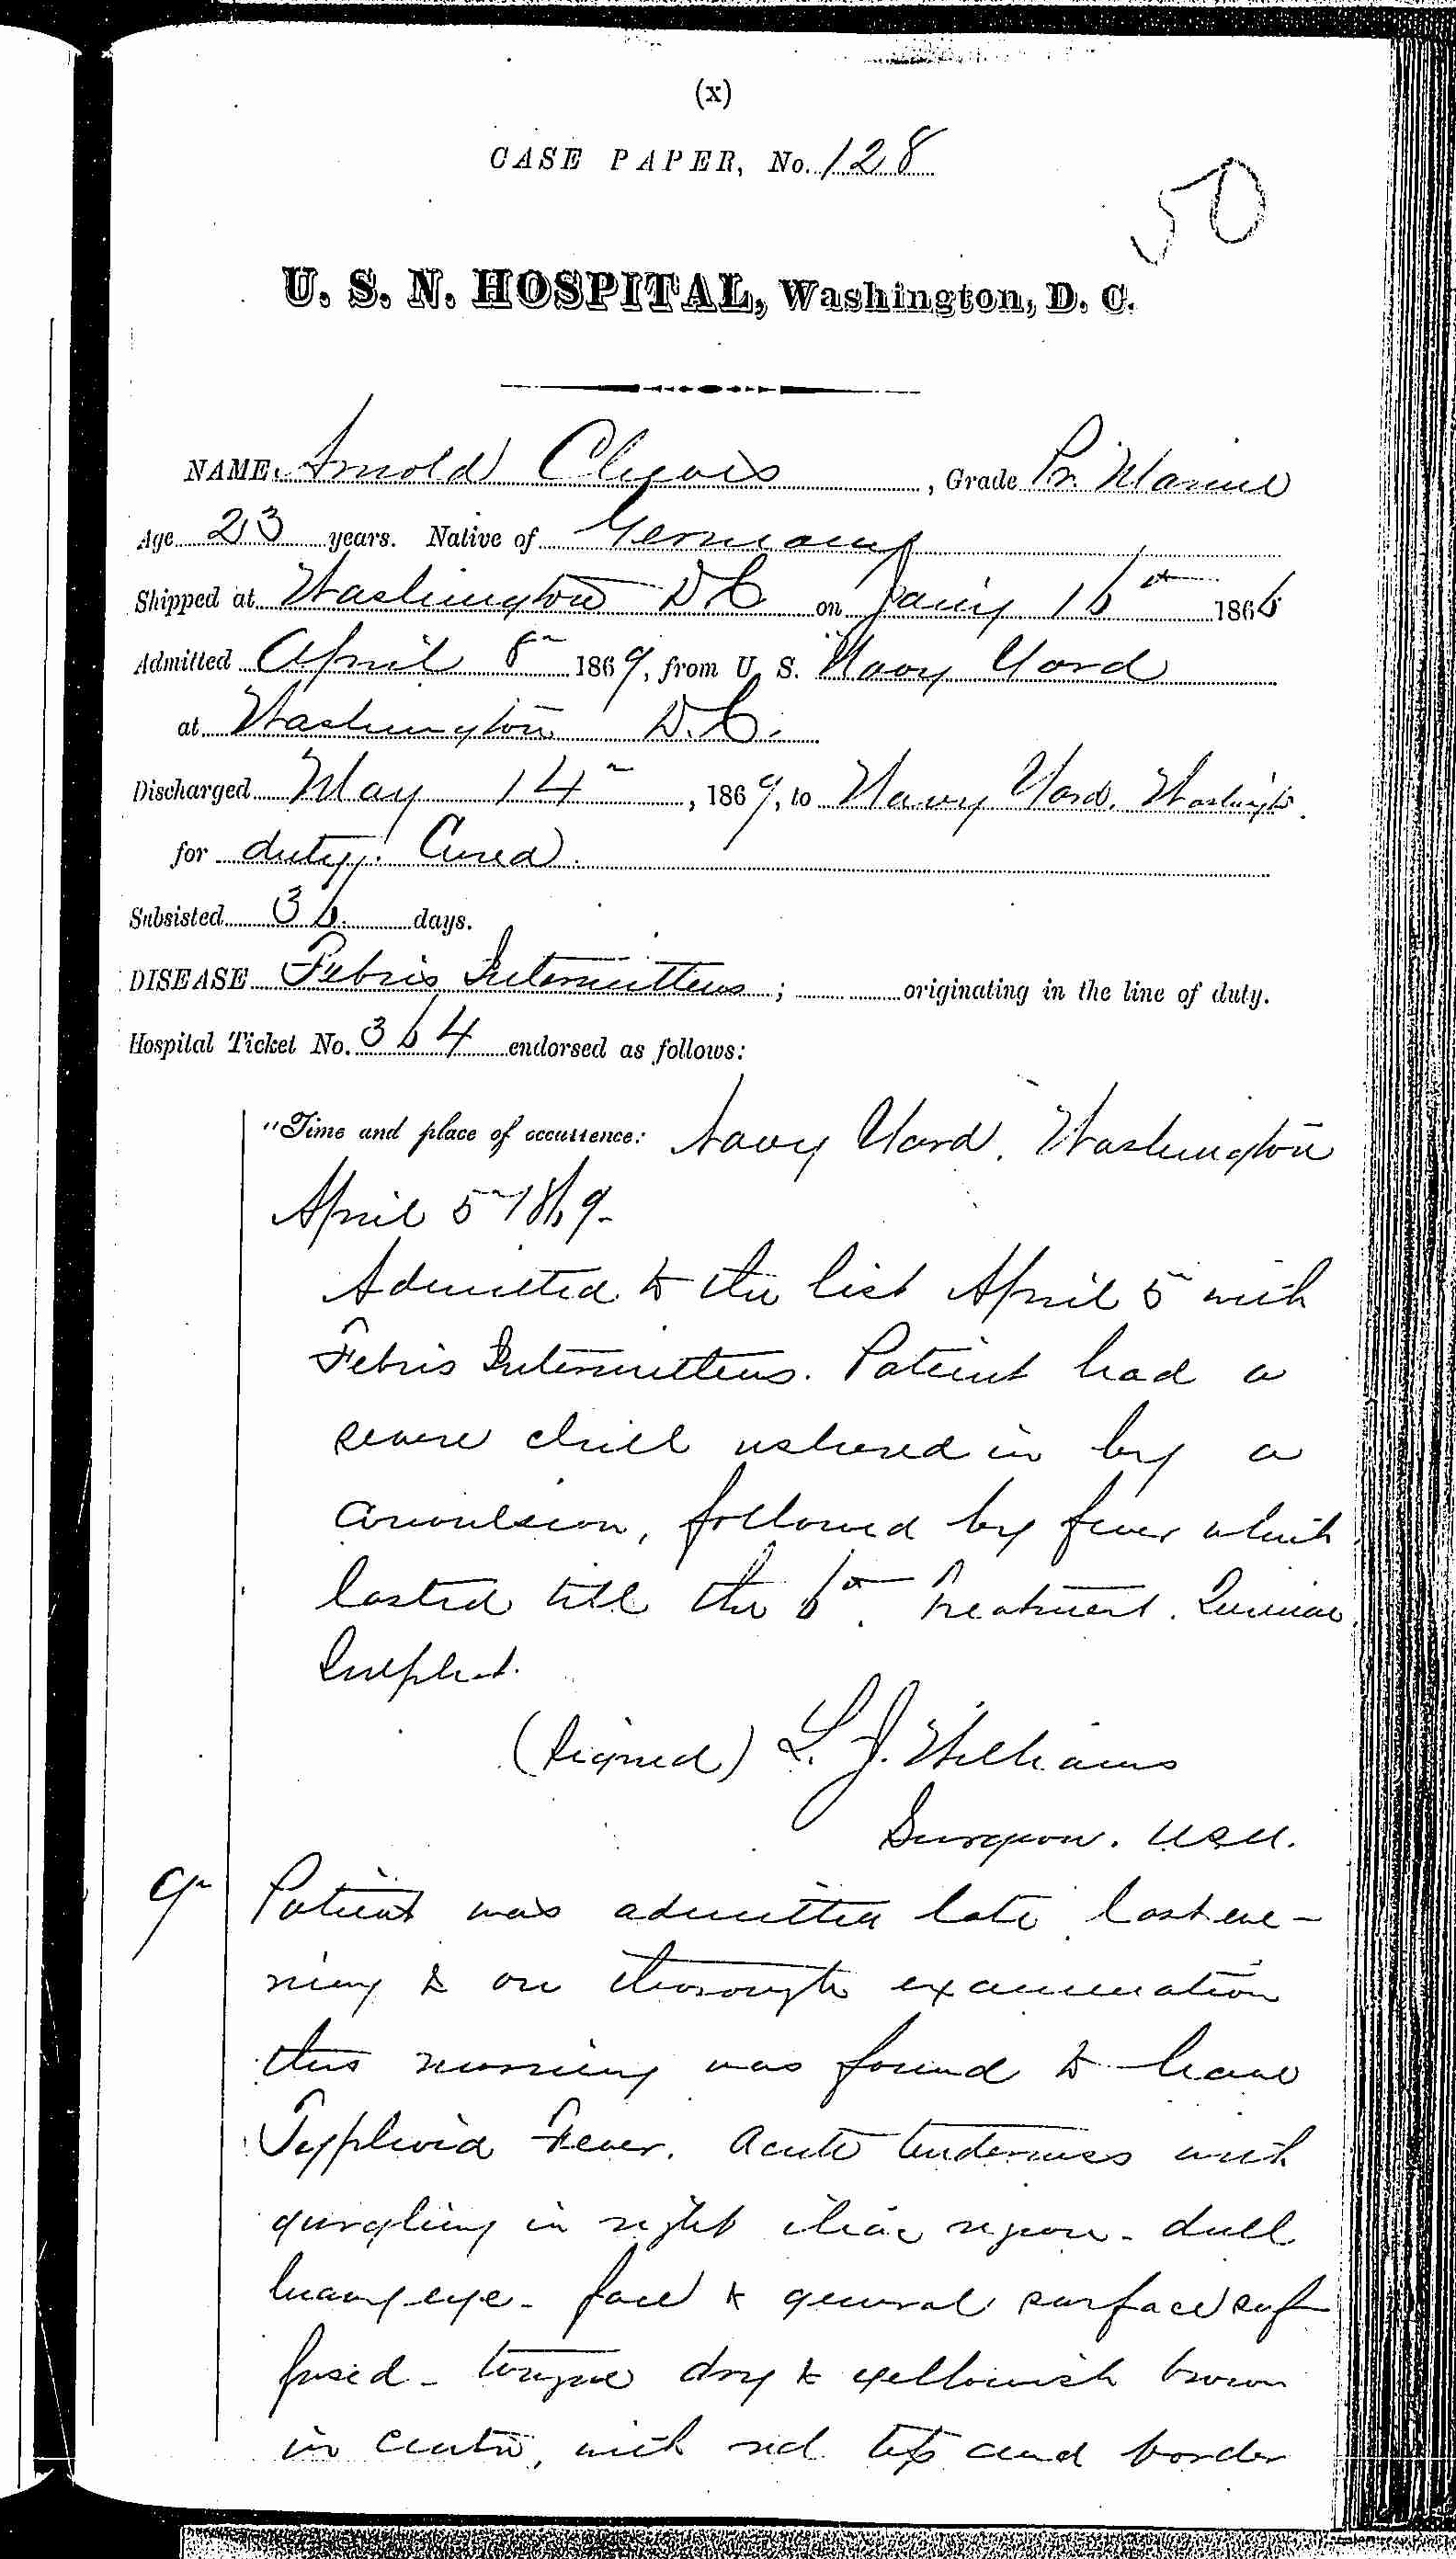 Entry for Arnold Cleeves (page 1 of 4) in the log Hospital Tickets and Case Papers - Naval Hospital - Washington, D.C. - 1868-69